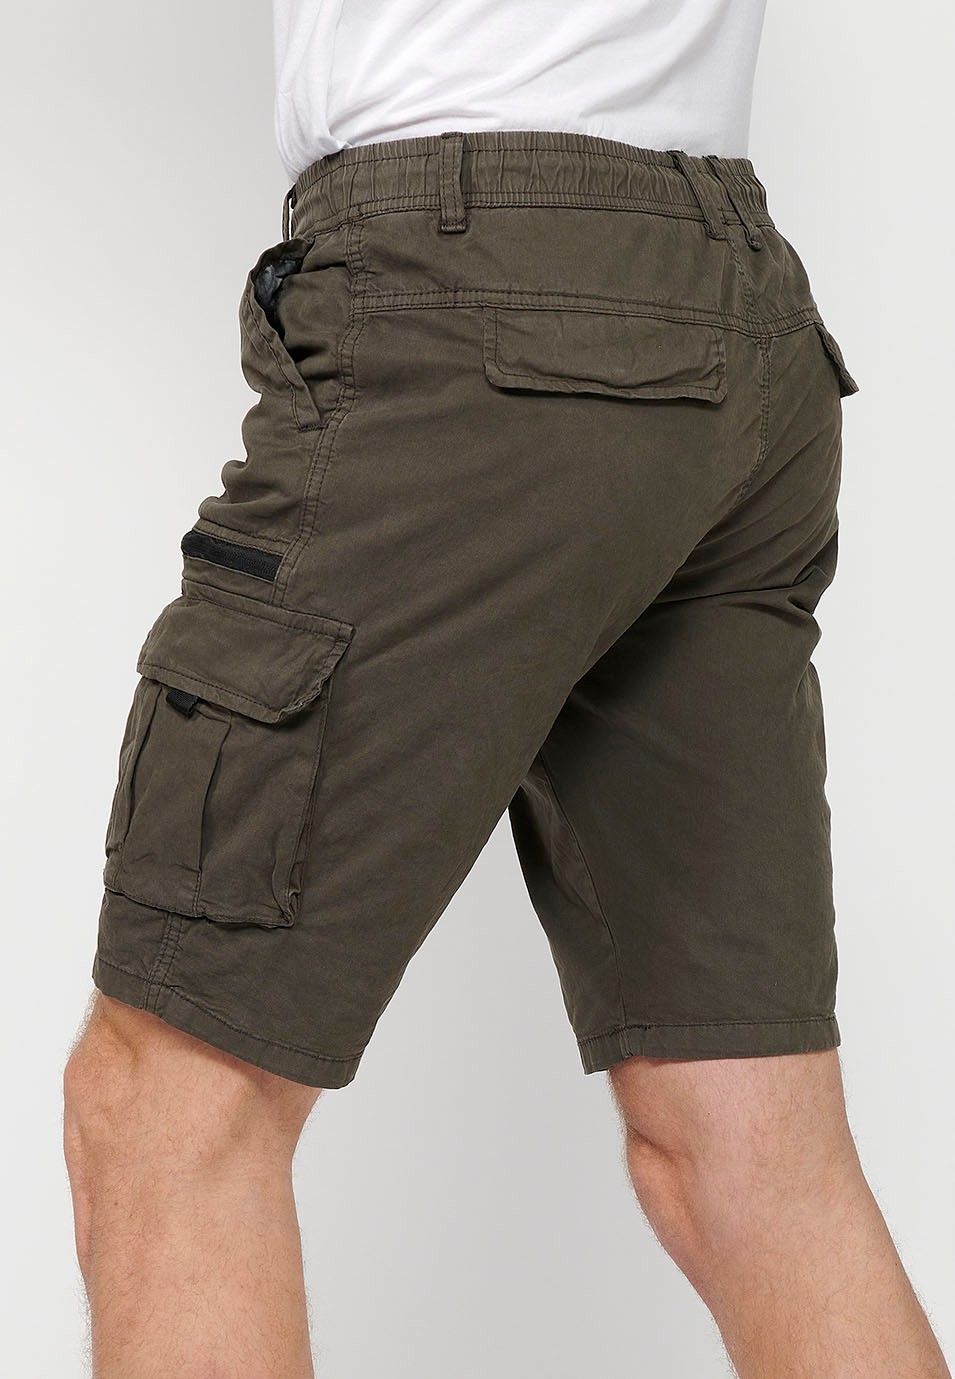 Cargo shorts with side pockets with flap and front closure with zipper and button in Olive Color for Men